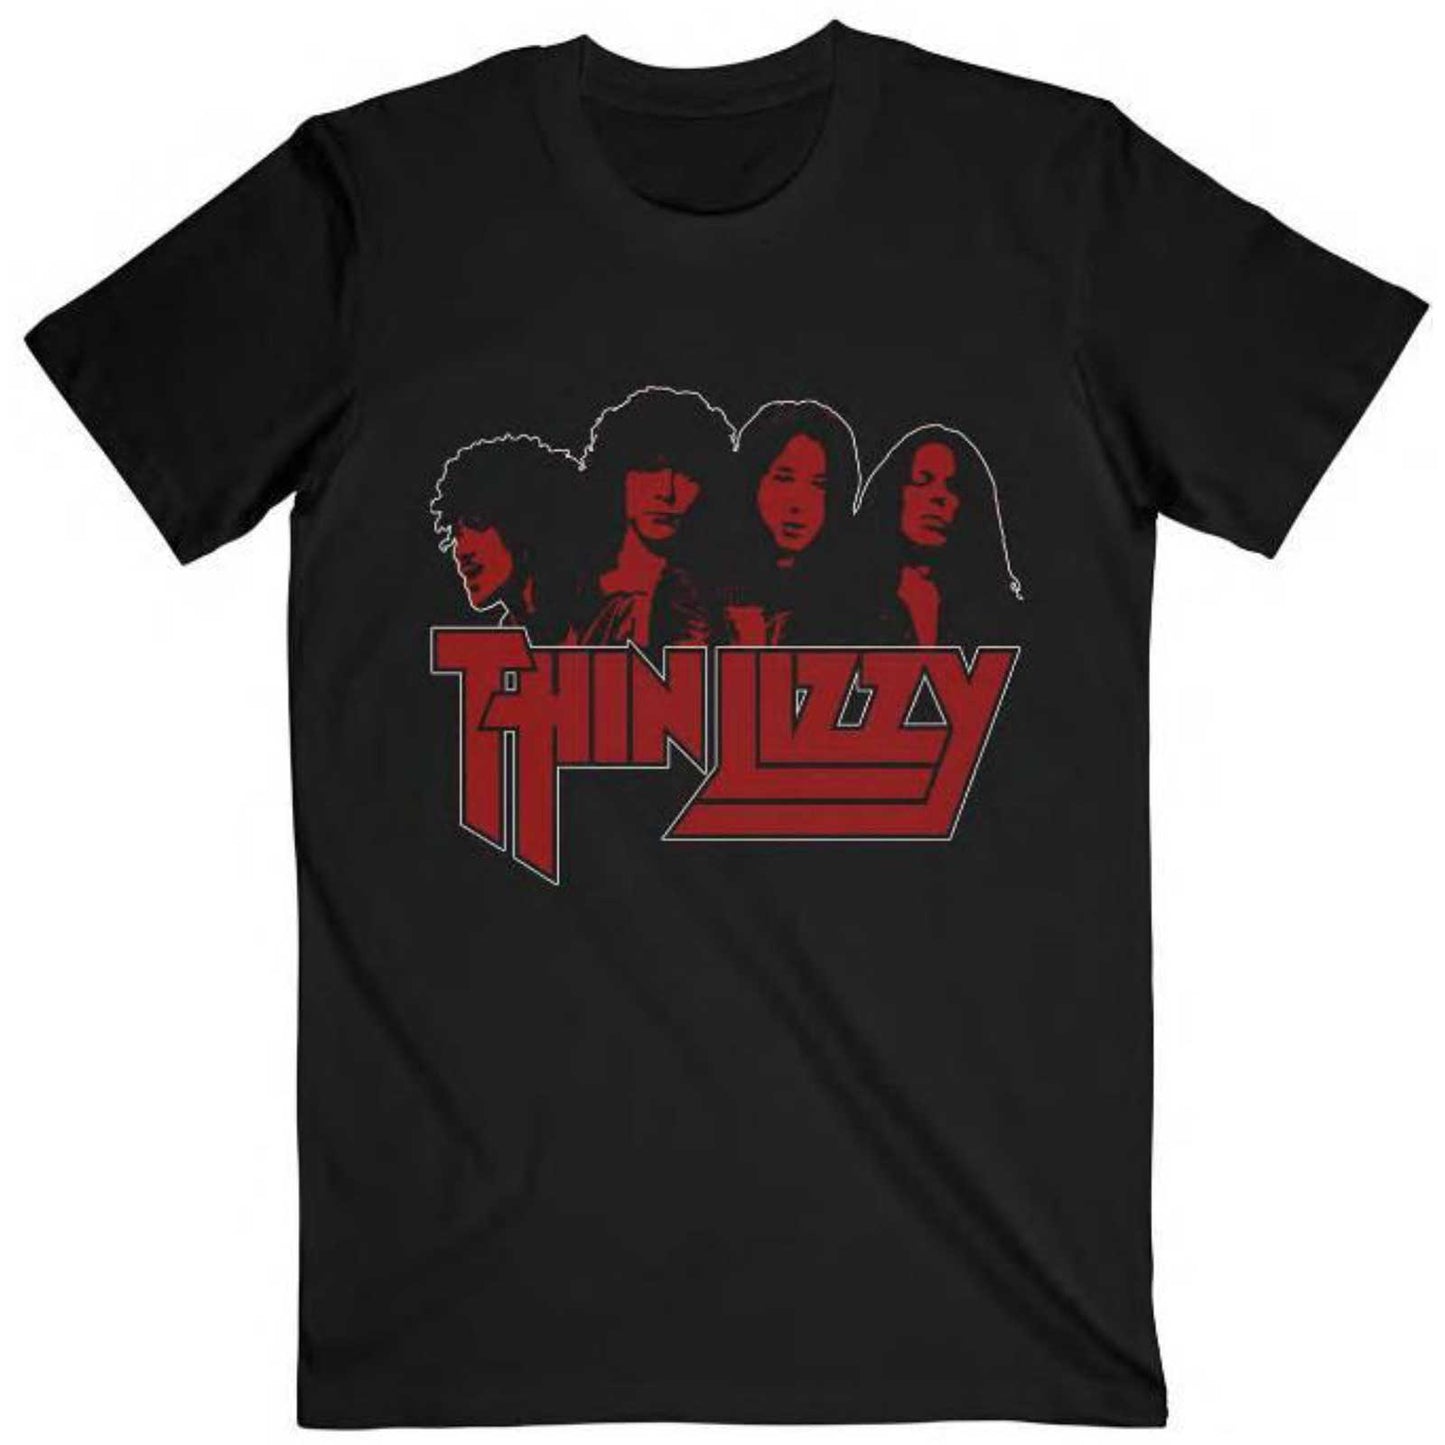 THIN Lizzy shirt ireland official